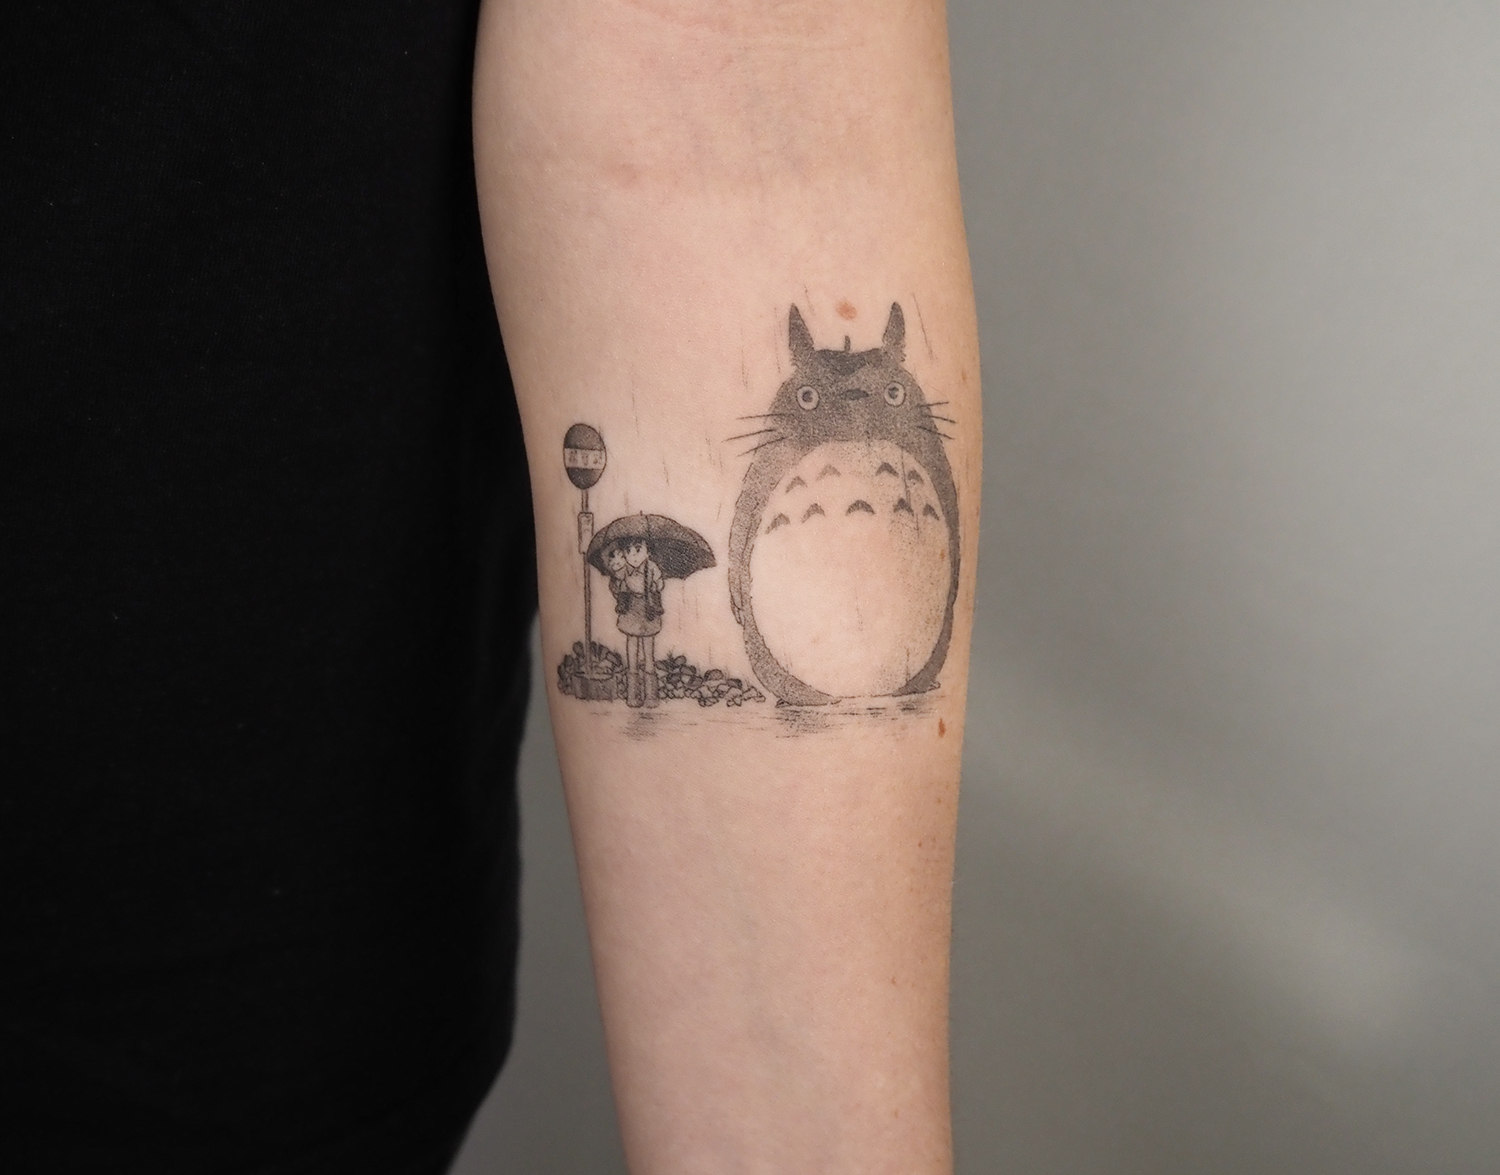 A tattoo that has healed eight months; a scene from “My Neighbor Totoro.”